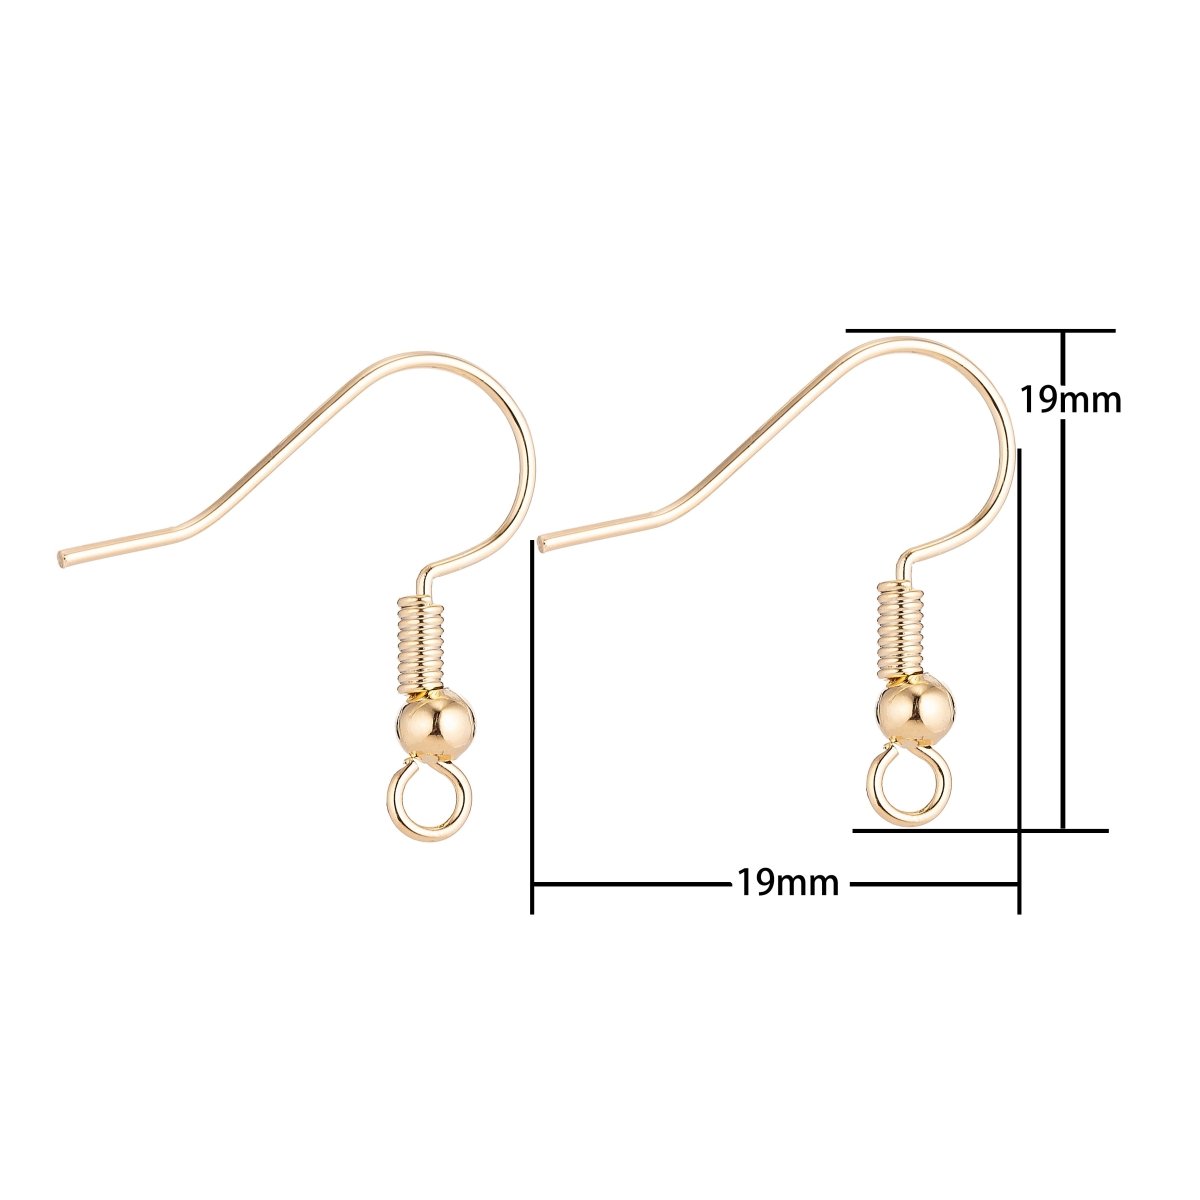 19×19mm Ear Hook, 3mm ball, Jewelry Earrings, Ear Wires, Brass Earring Component, French Ear Hook Silver / Gold Plated for jewelry making Supply K-236 L-162 - DLUXCA